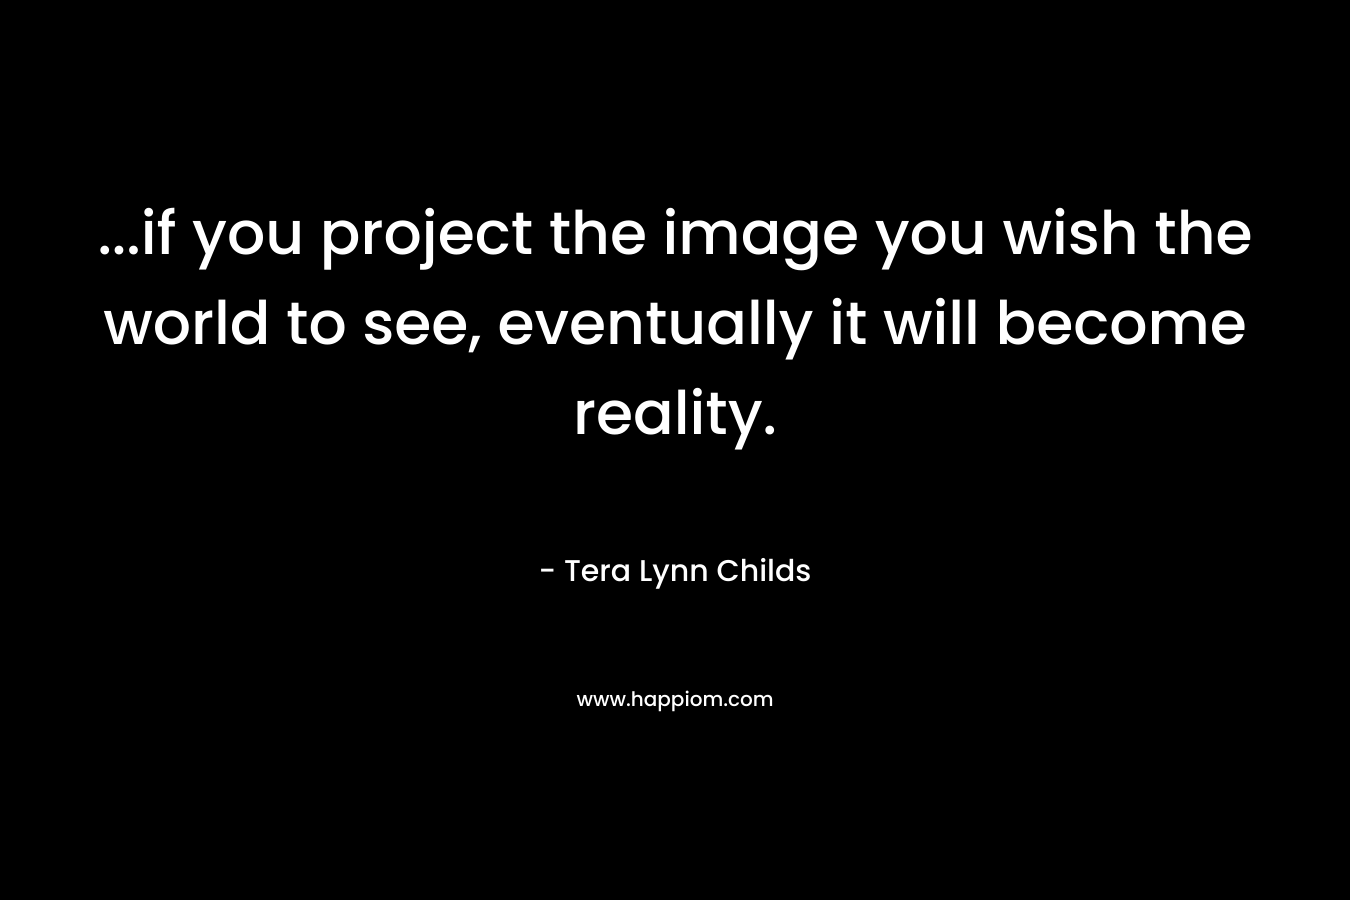 …if you project the image you wish the world to see, eventually it will become reality. – Tera Lynn Childs